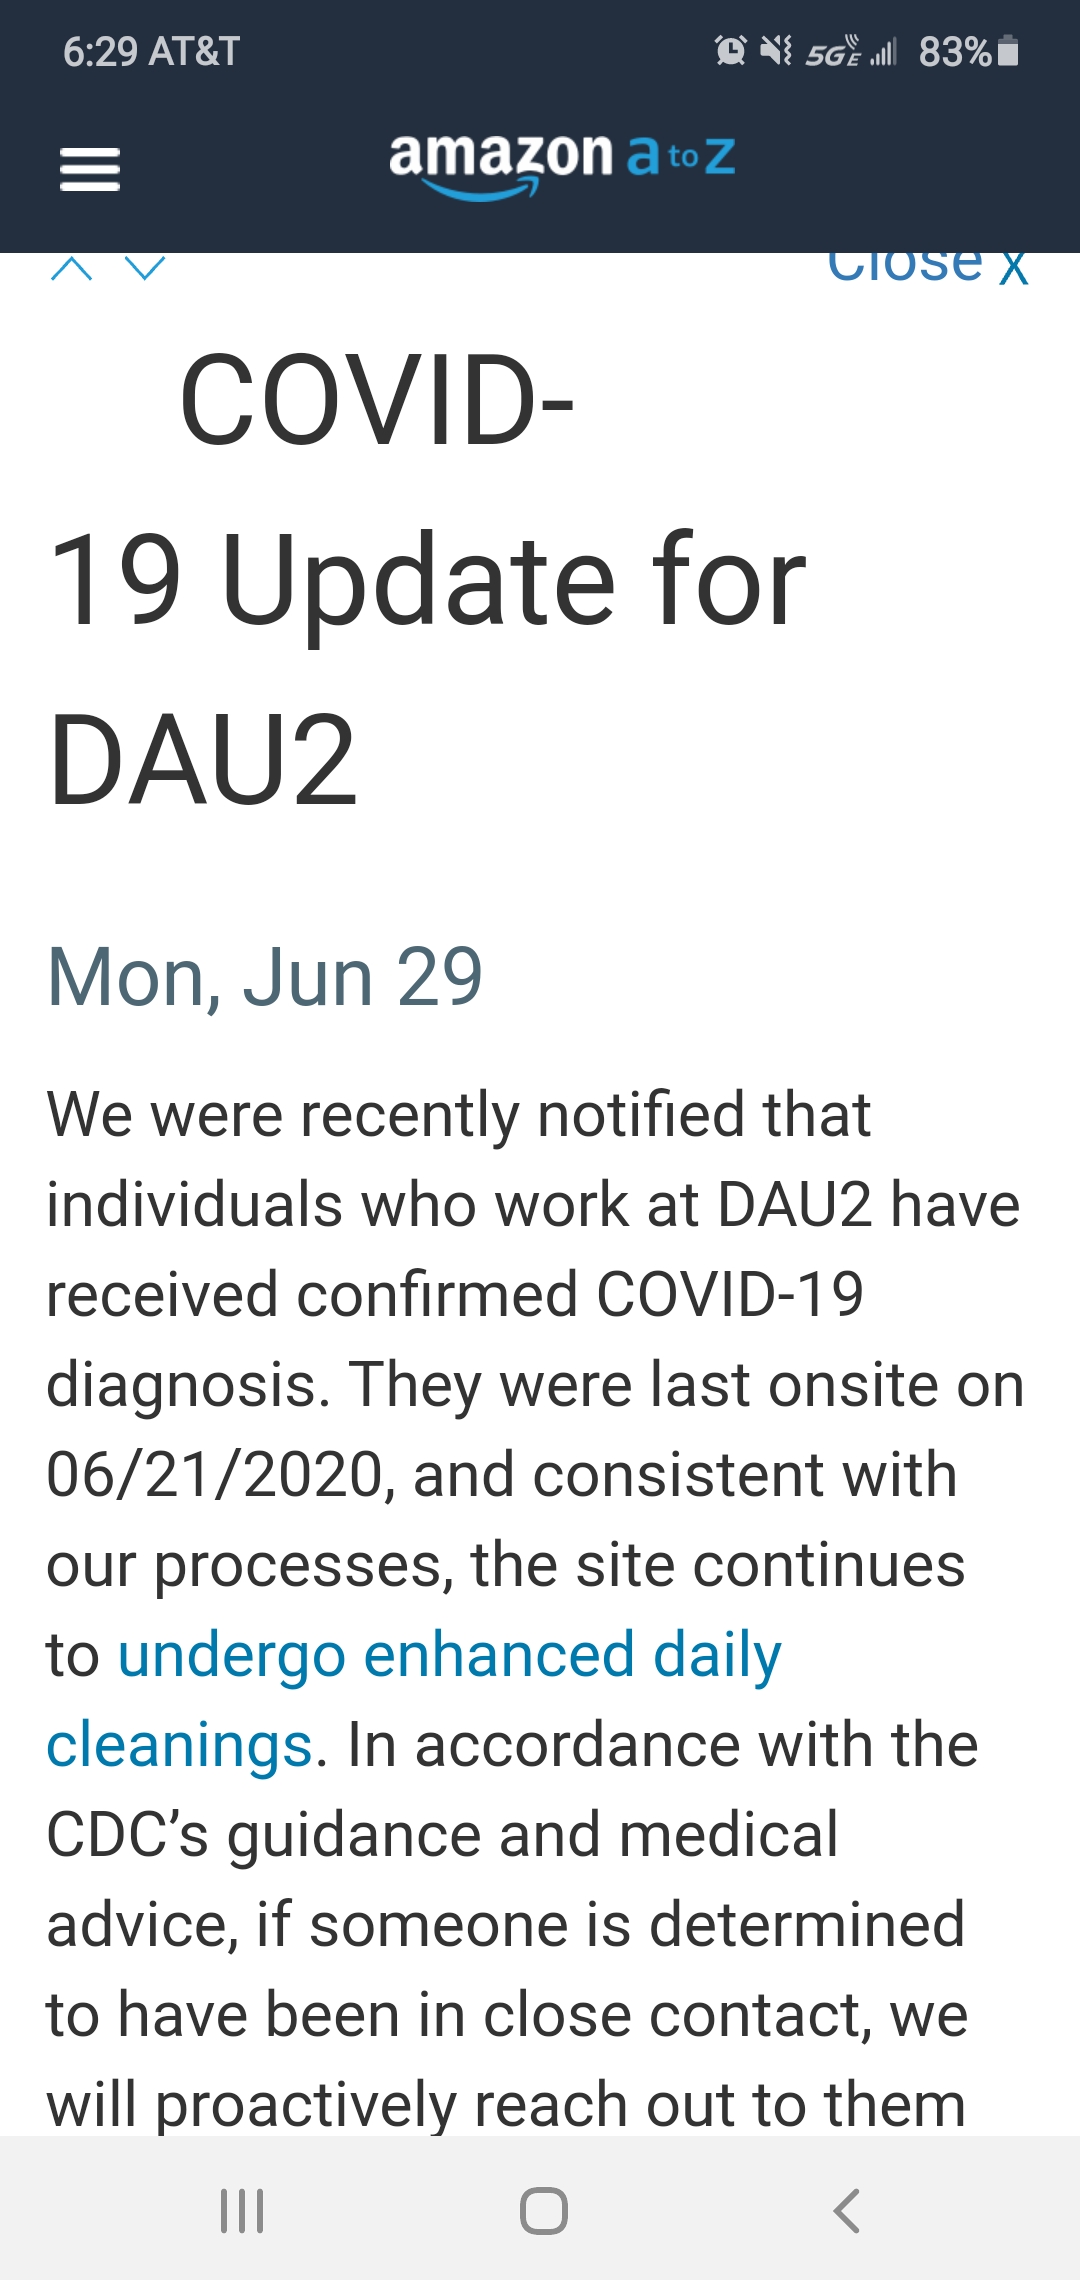 Covid 19 Notification sent to the Amazon A to Z